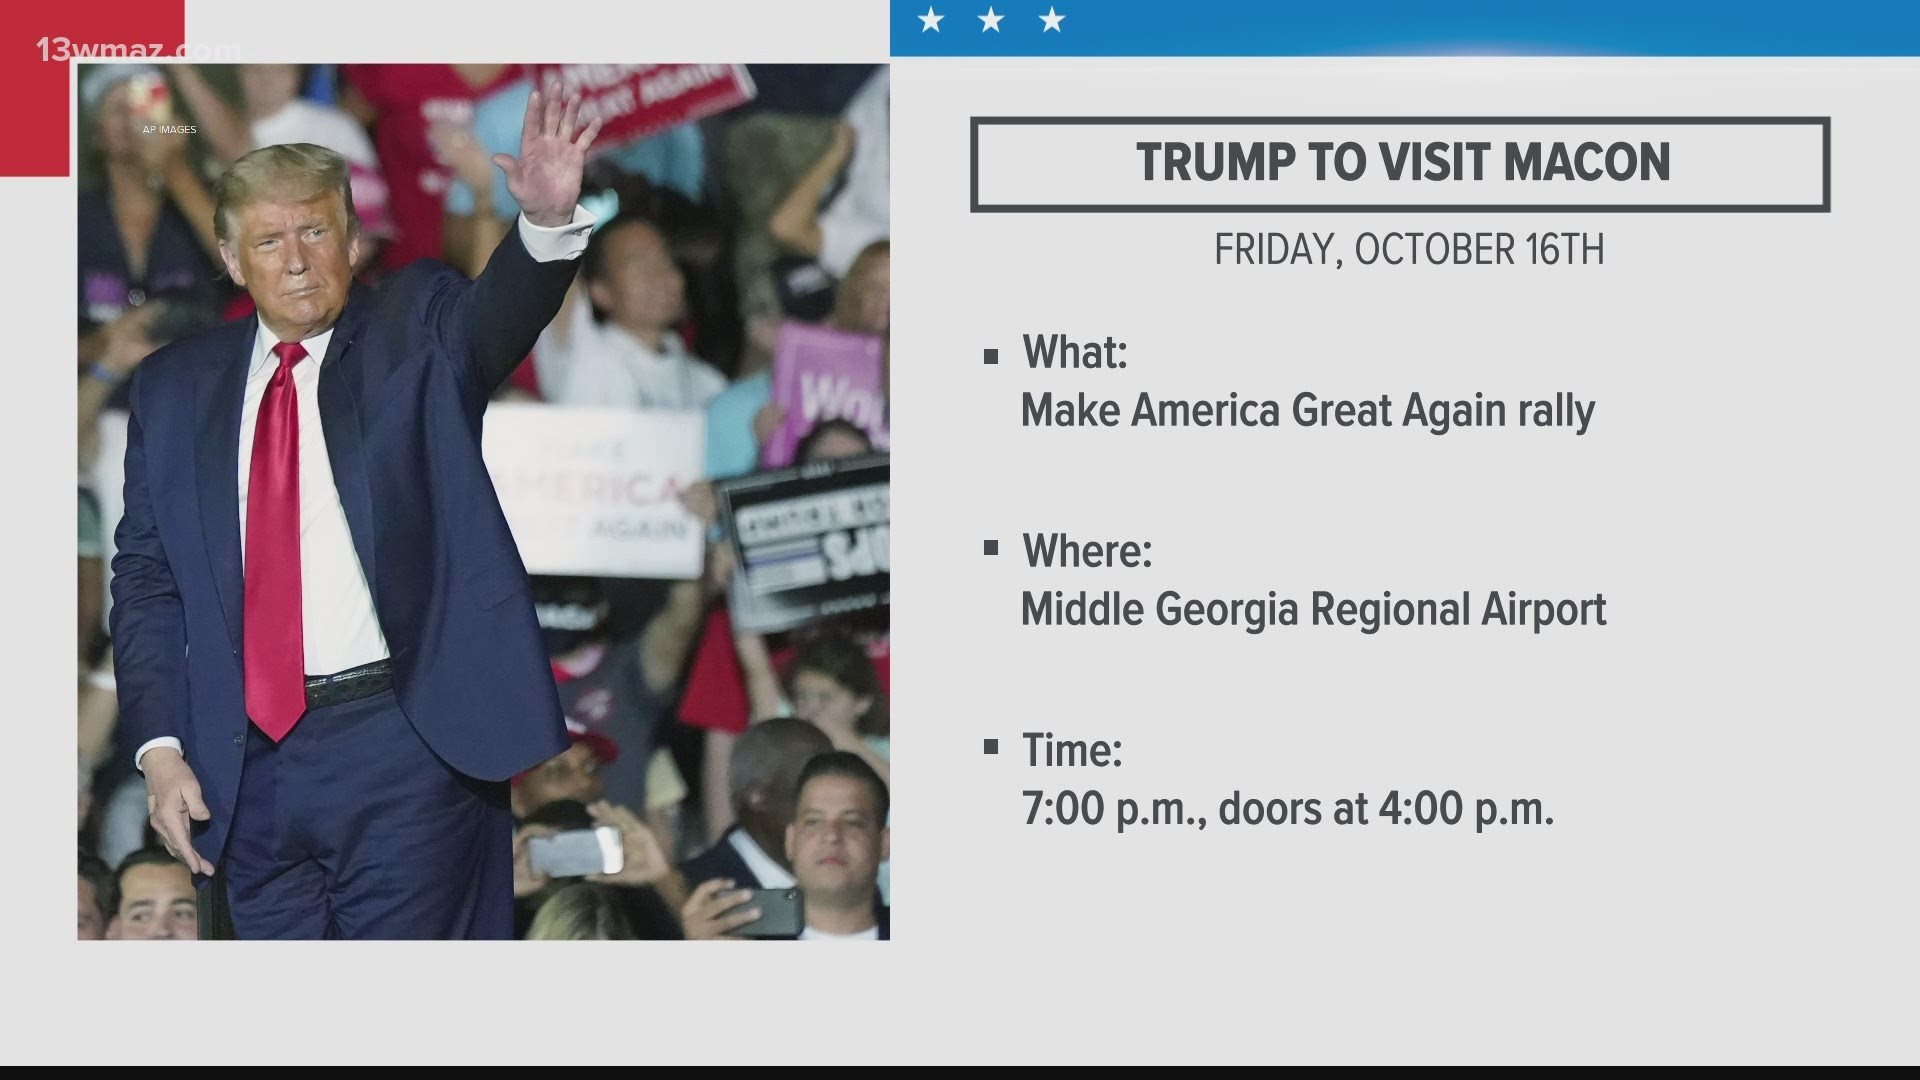 The president will be in Macon October 16